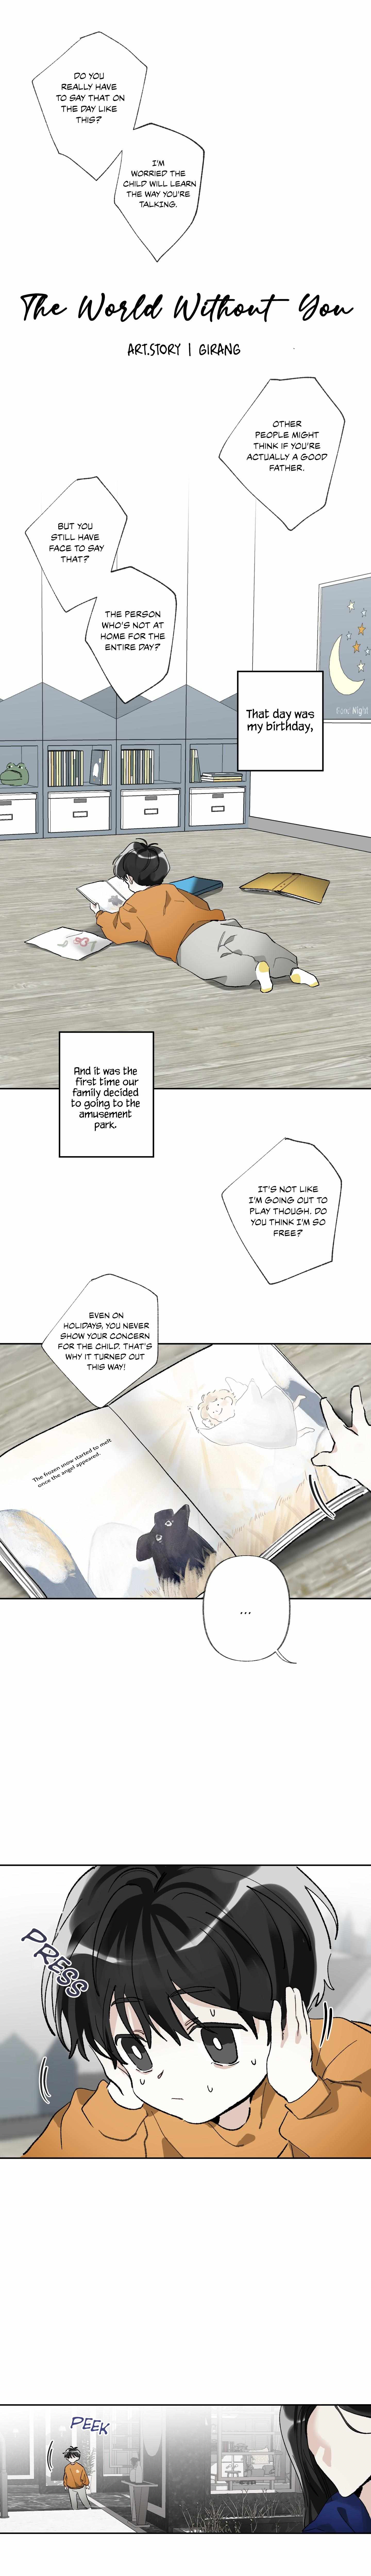 The World Without You - Page 3